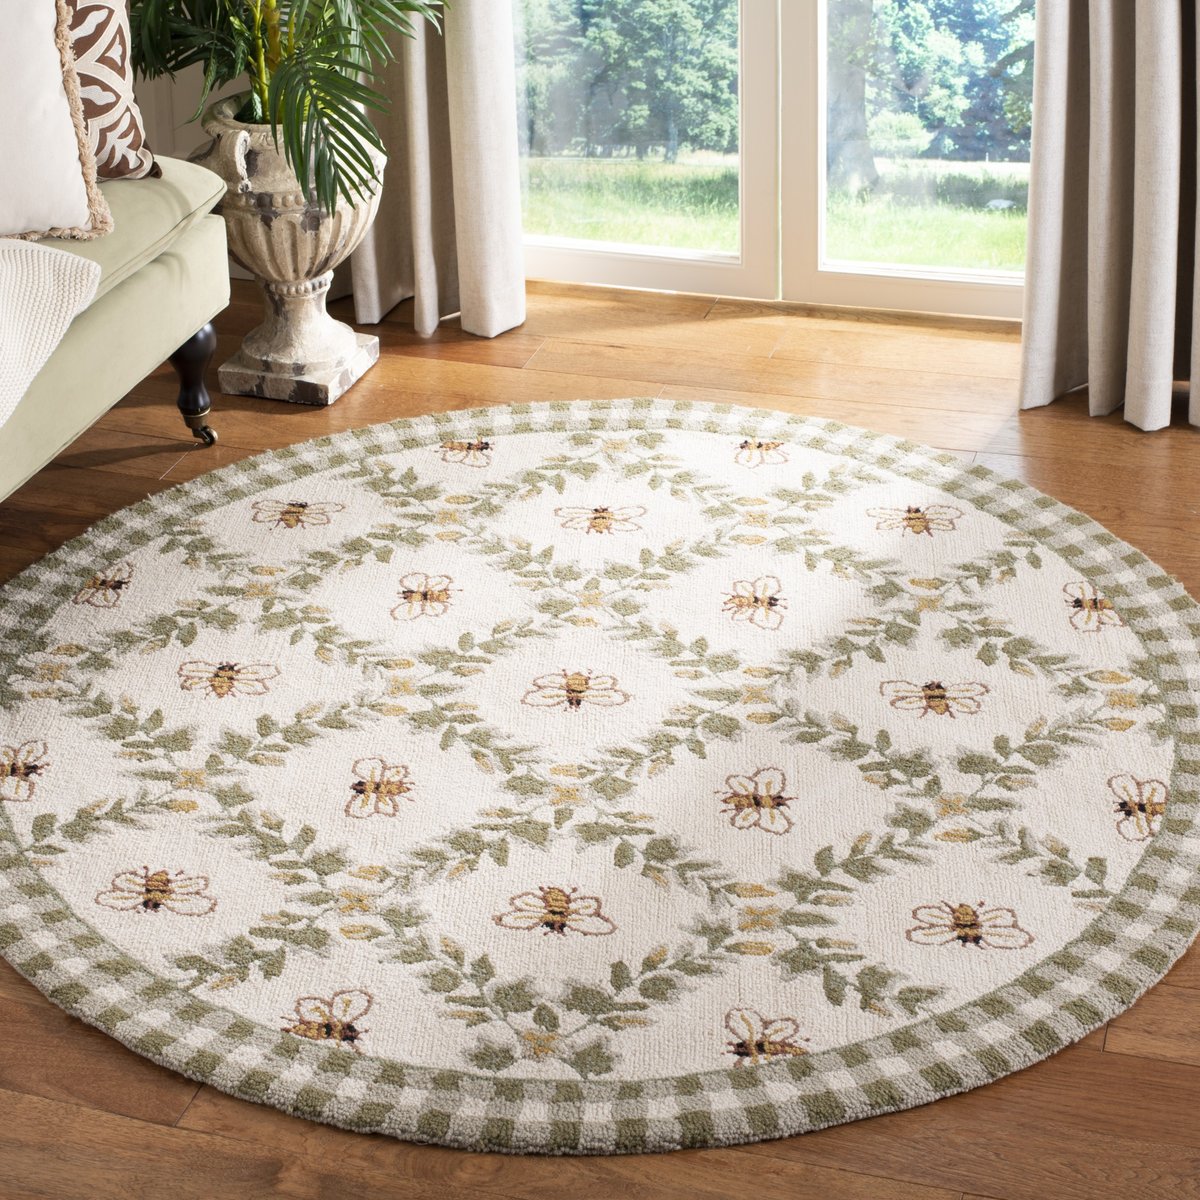 Safavieh Chelsea Collection HK230B Hand-Hooked Ivory and Light Green Wool  Round Area Rug, 5 feet 6 inches in Diameter (5'6 Diameter) : :  Home